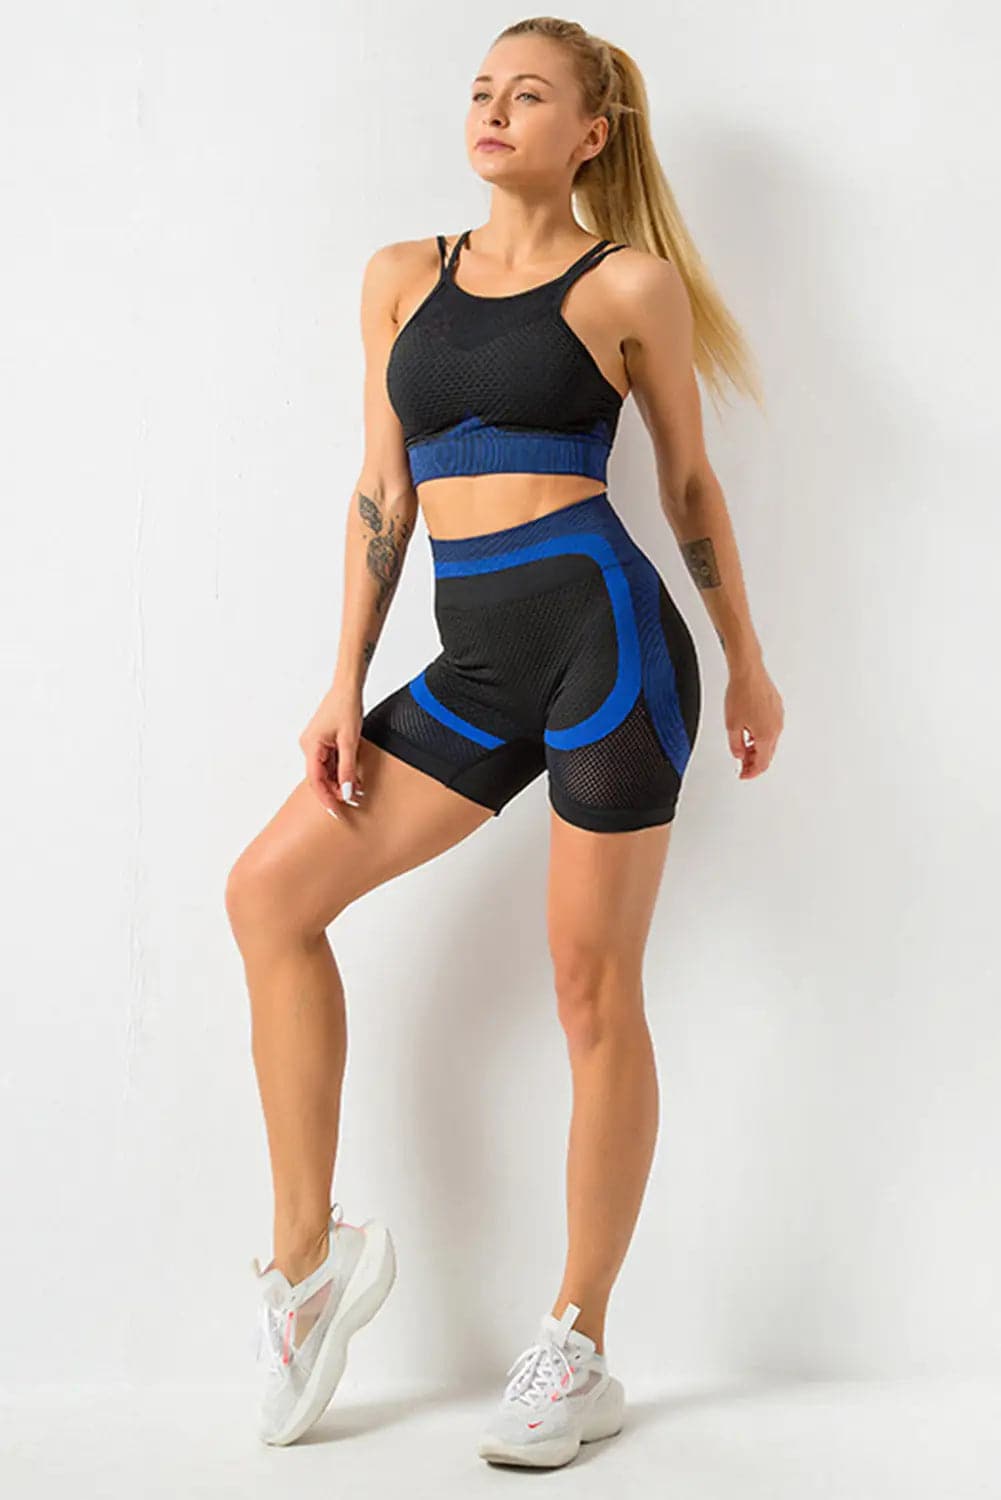 Sky Blue Breathable Mesh Gym Crop Top & Shorts Sports Set - Activewear